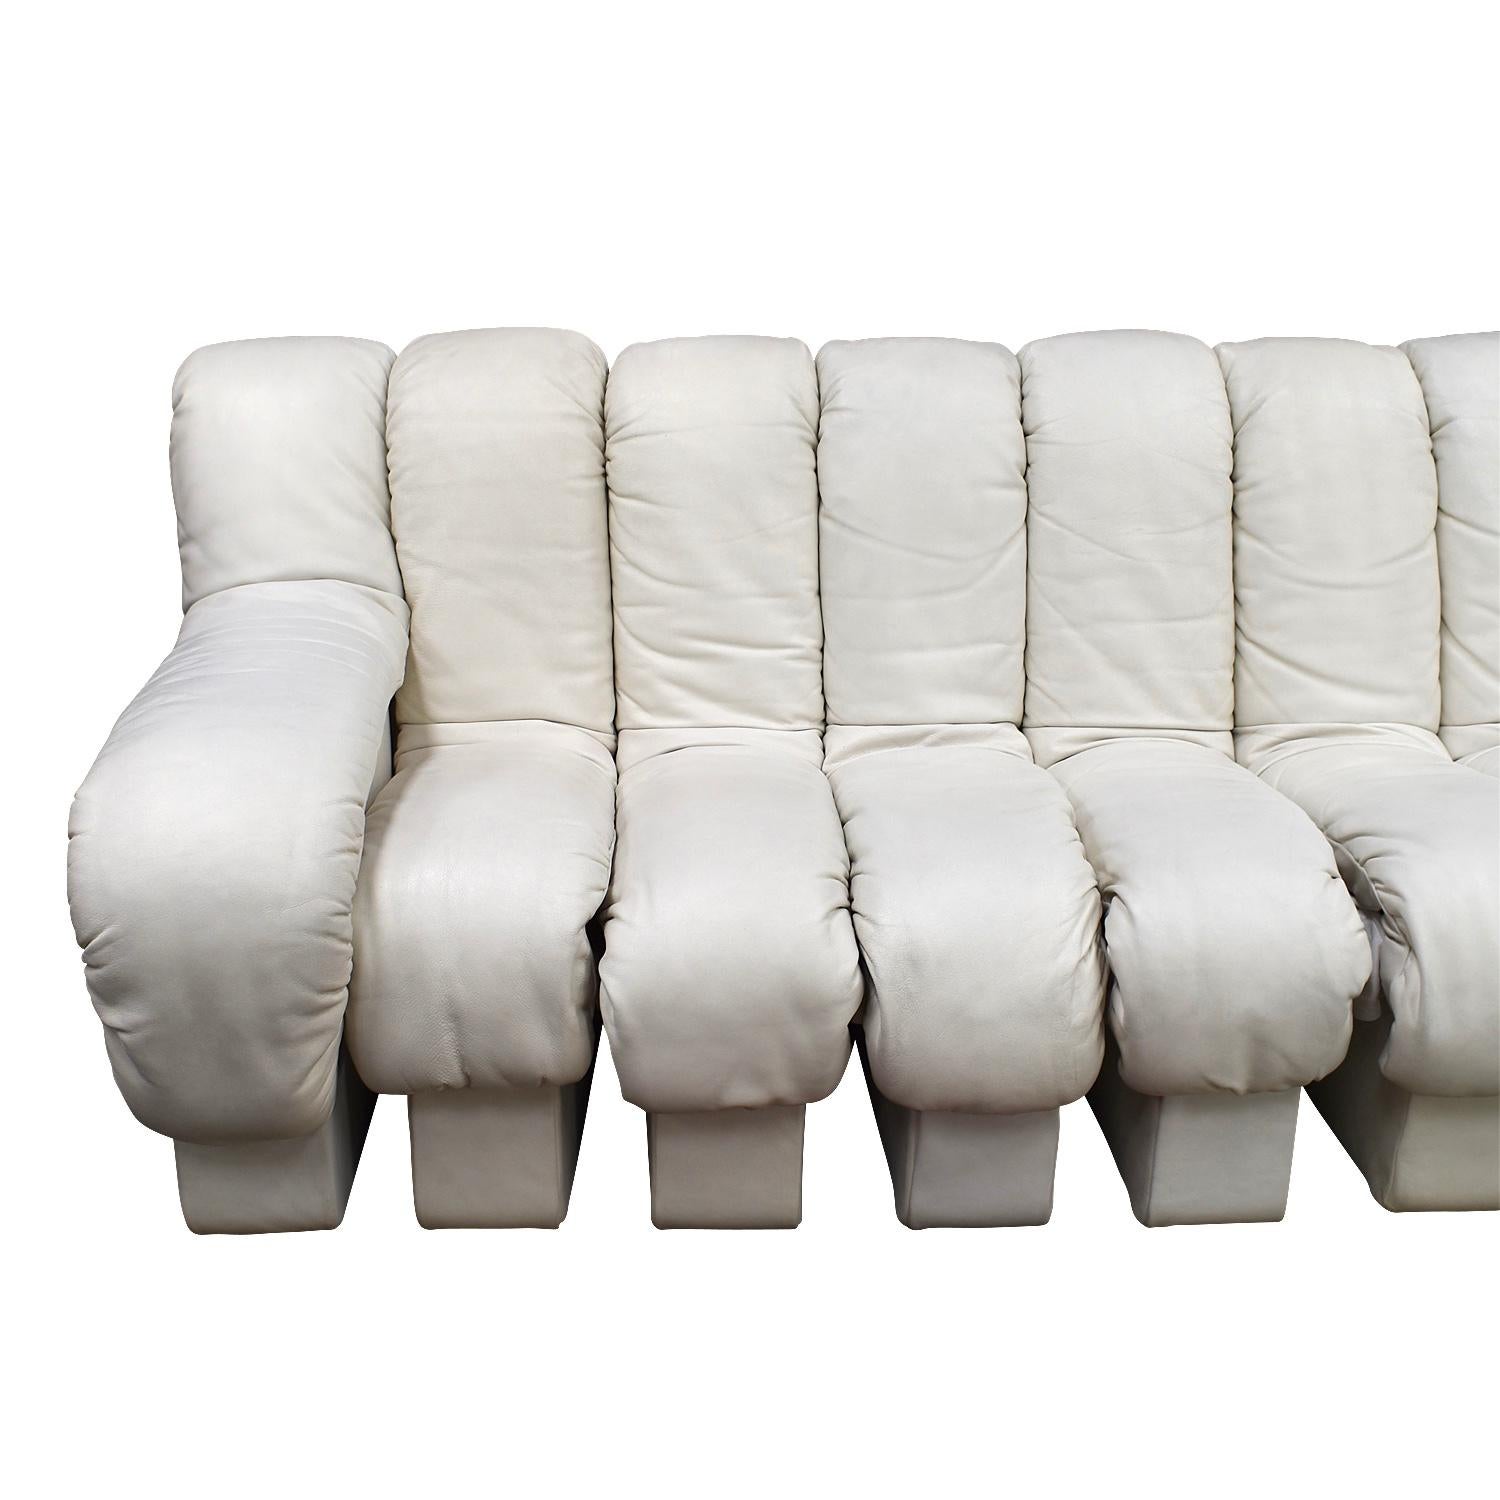 20-Piece De Sede DS600 'Snake' Non-Stop Sectional Sofa in Crème White Leather 7